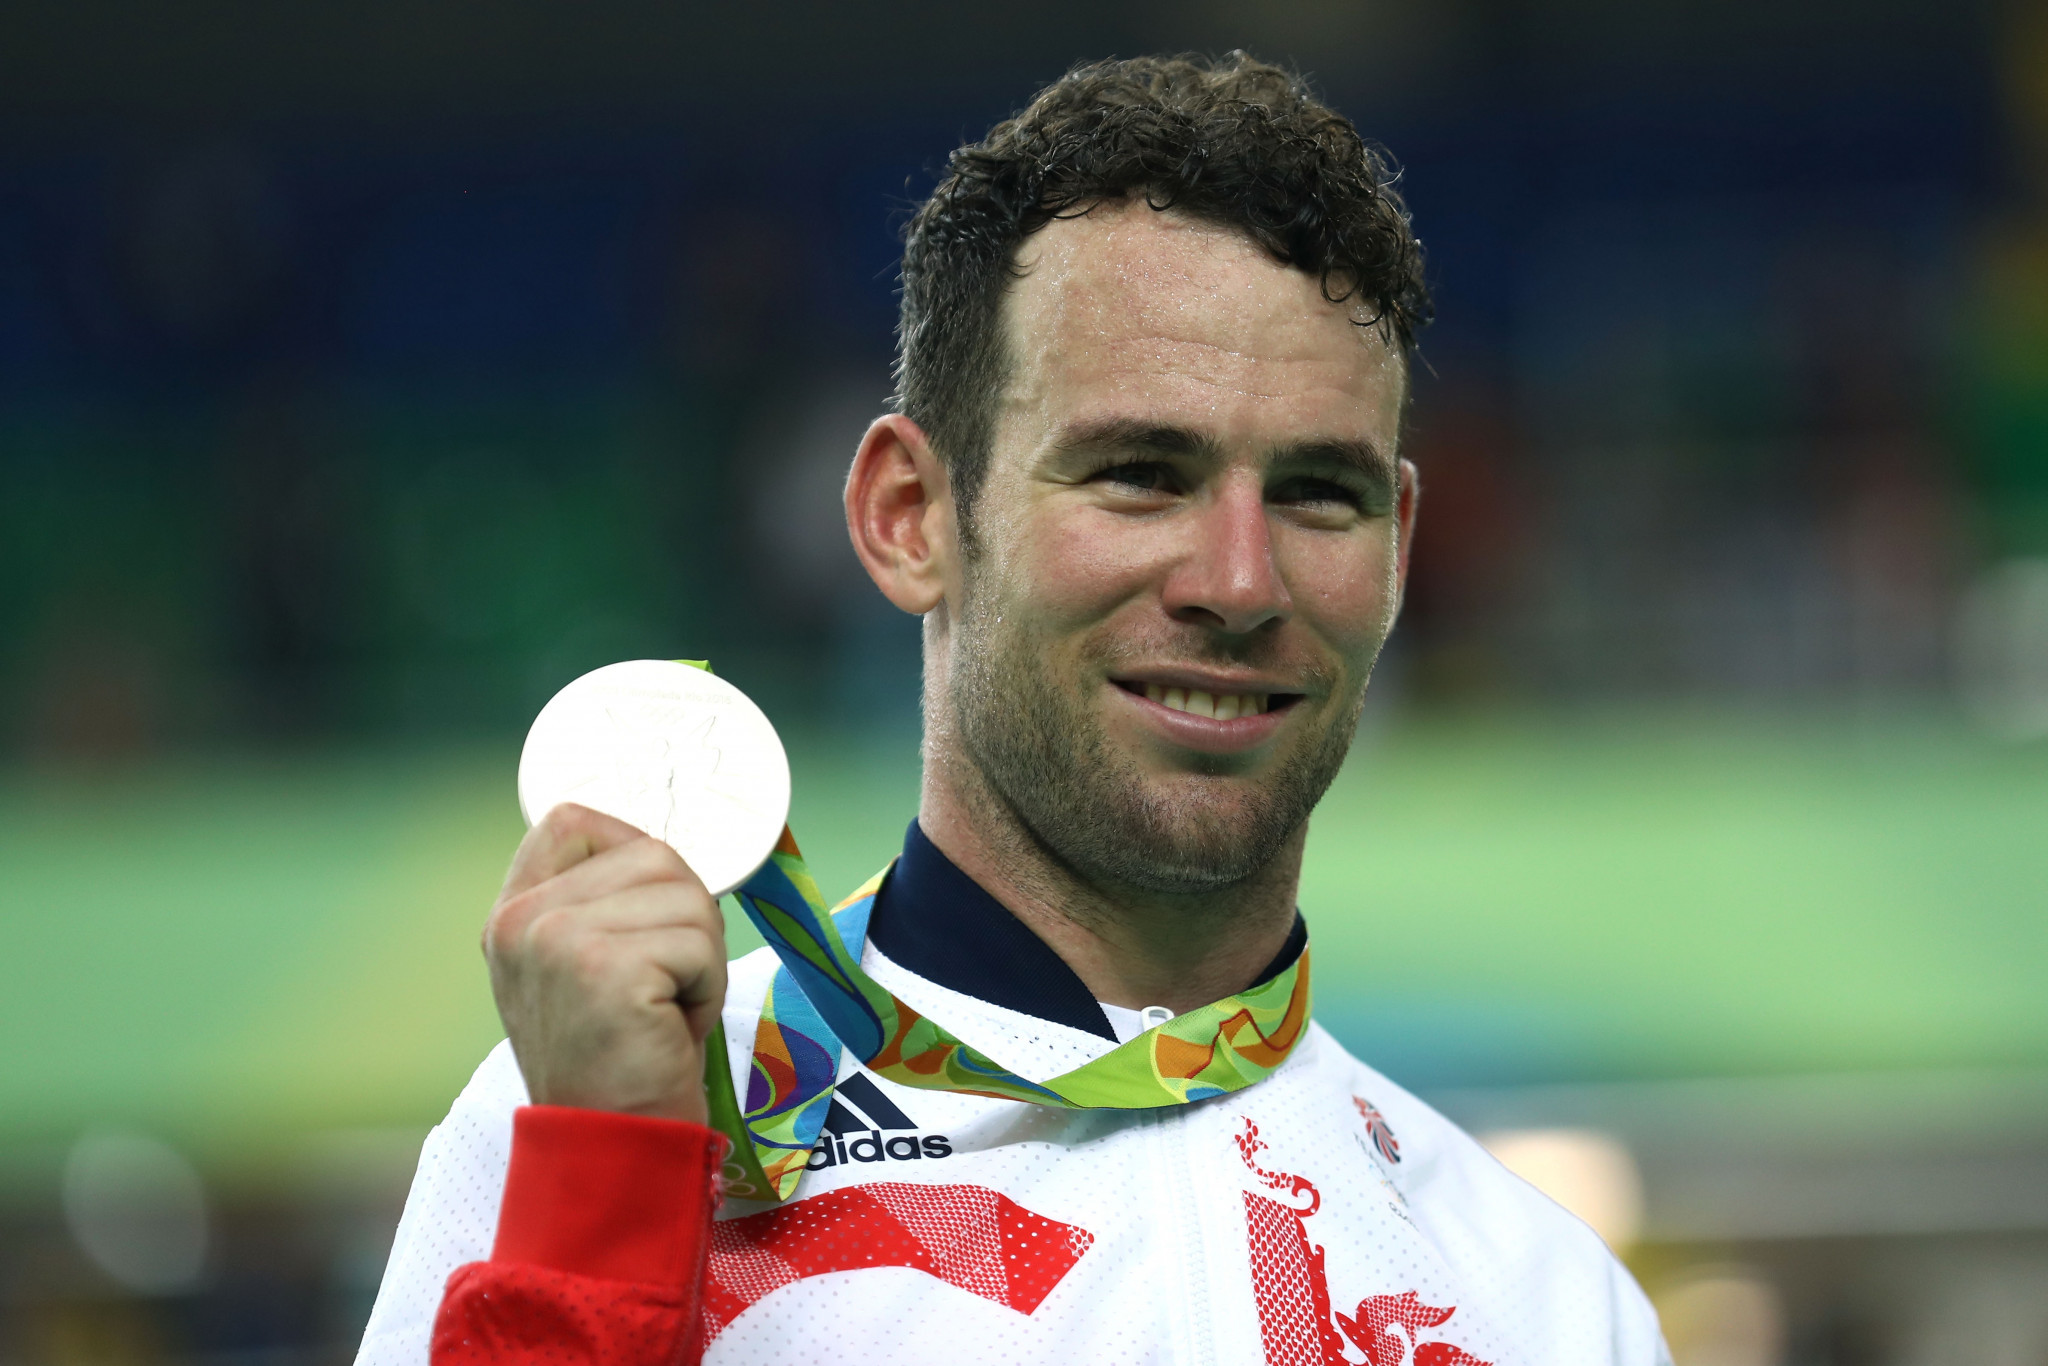 Cavendish won Olympic silver on the track for Britain in the madison at the Rio 2016 Olympics ©Getty Images